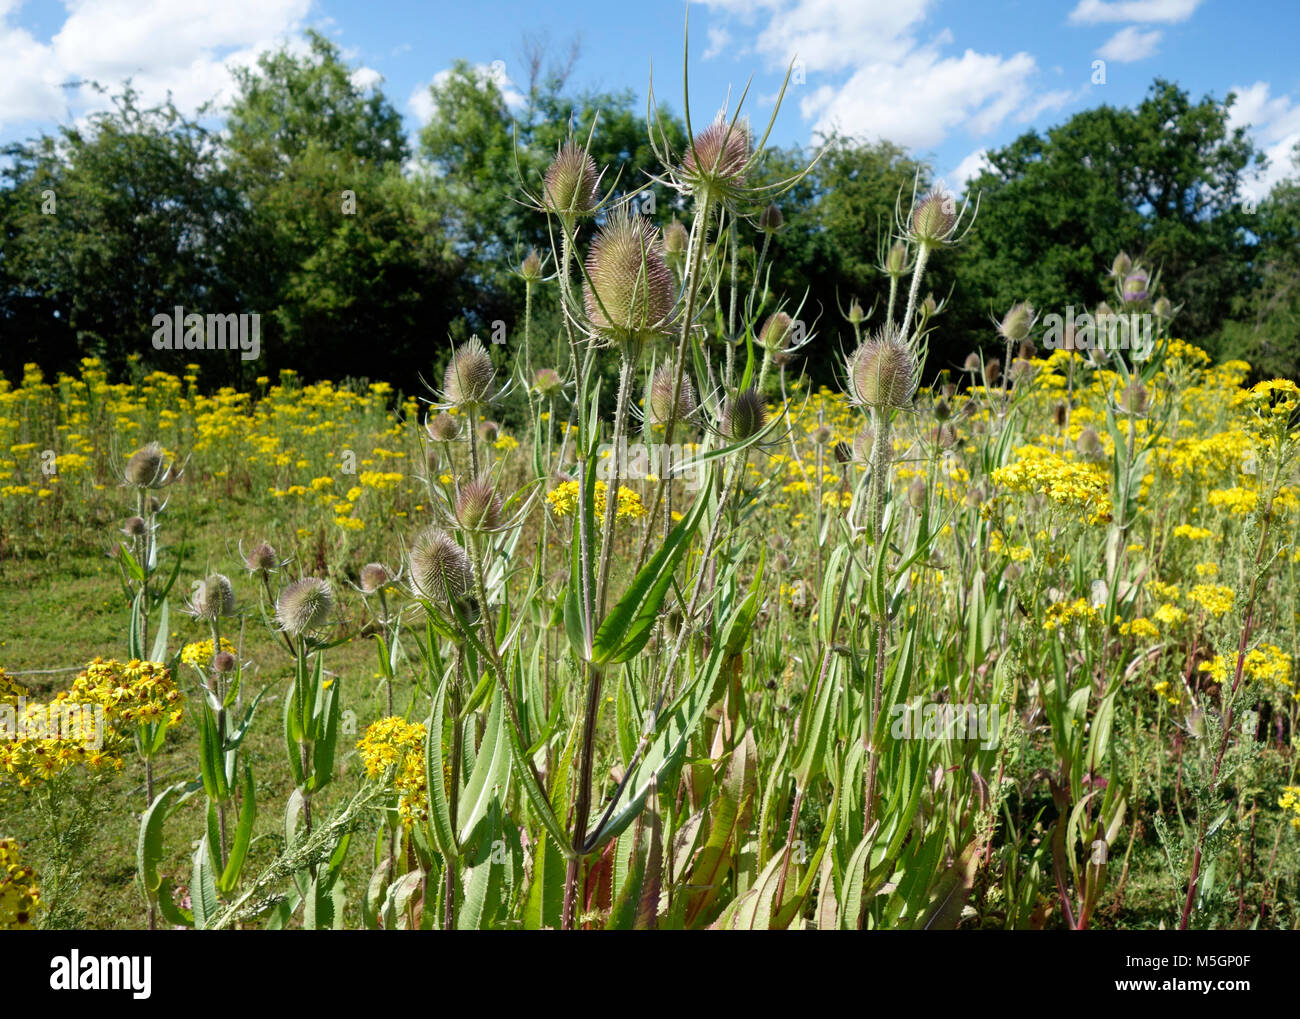 Teasels and ragwort growing in a field Stock Photo